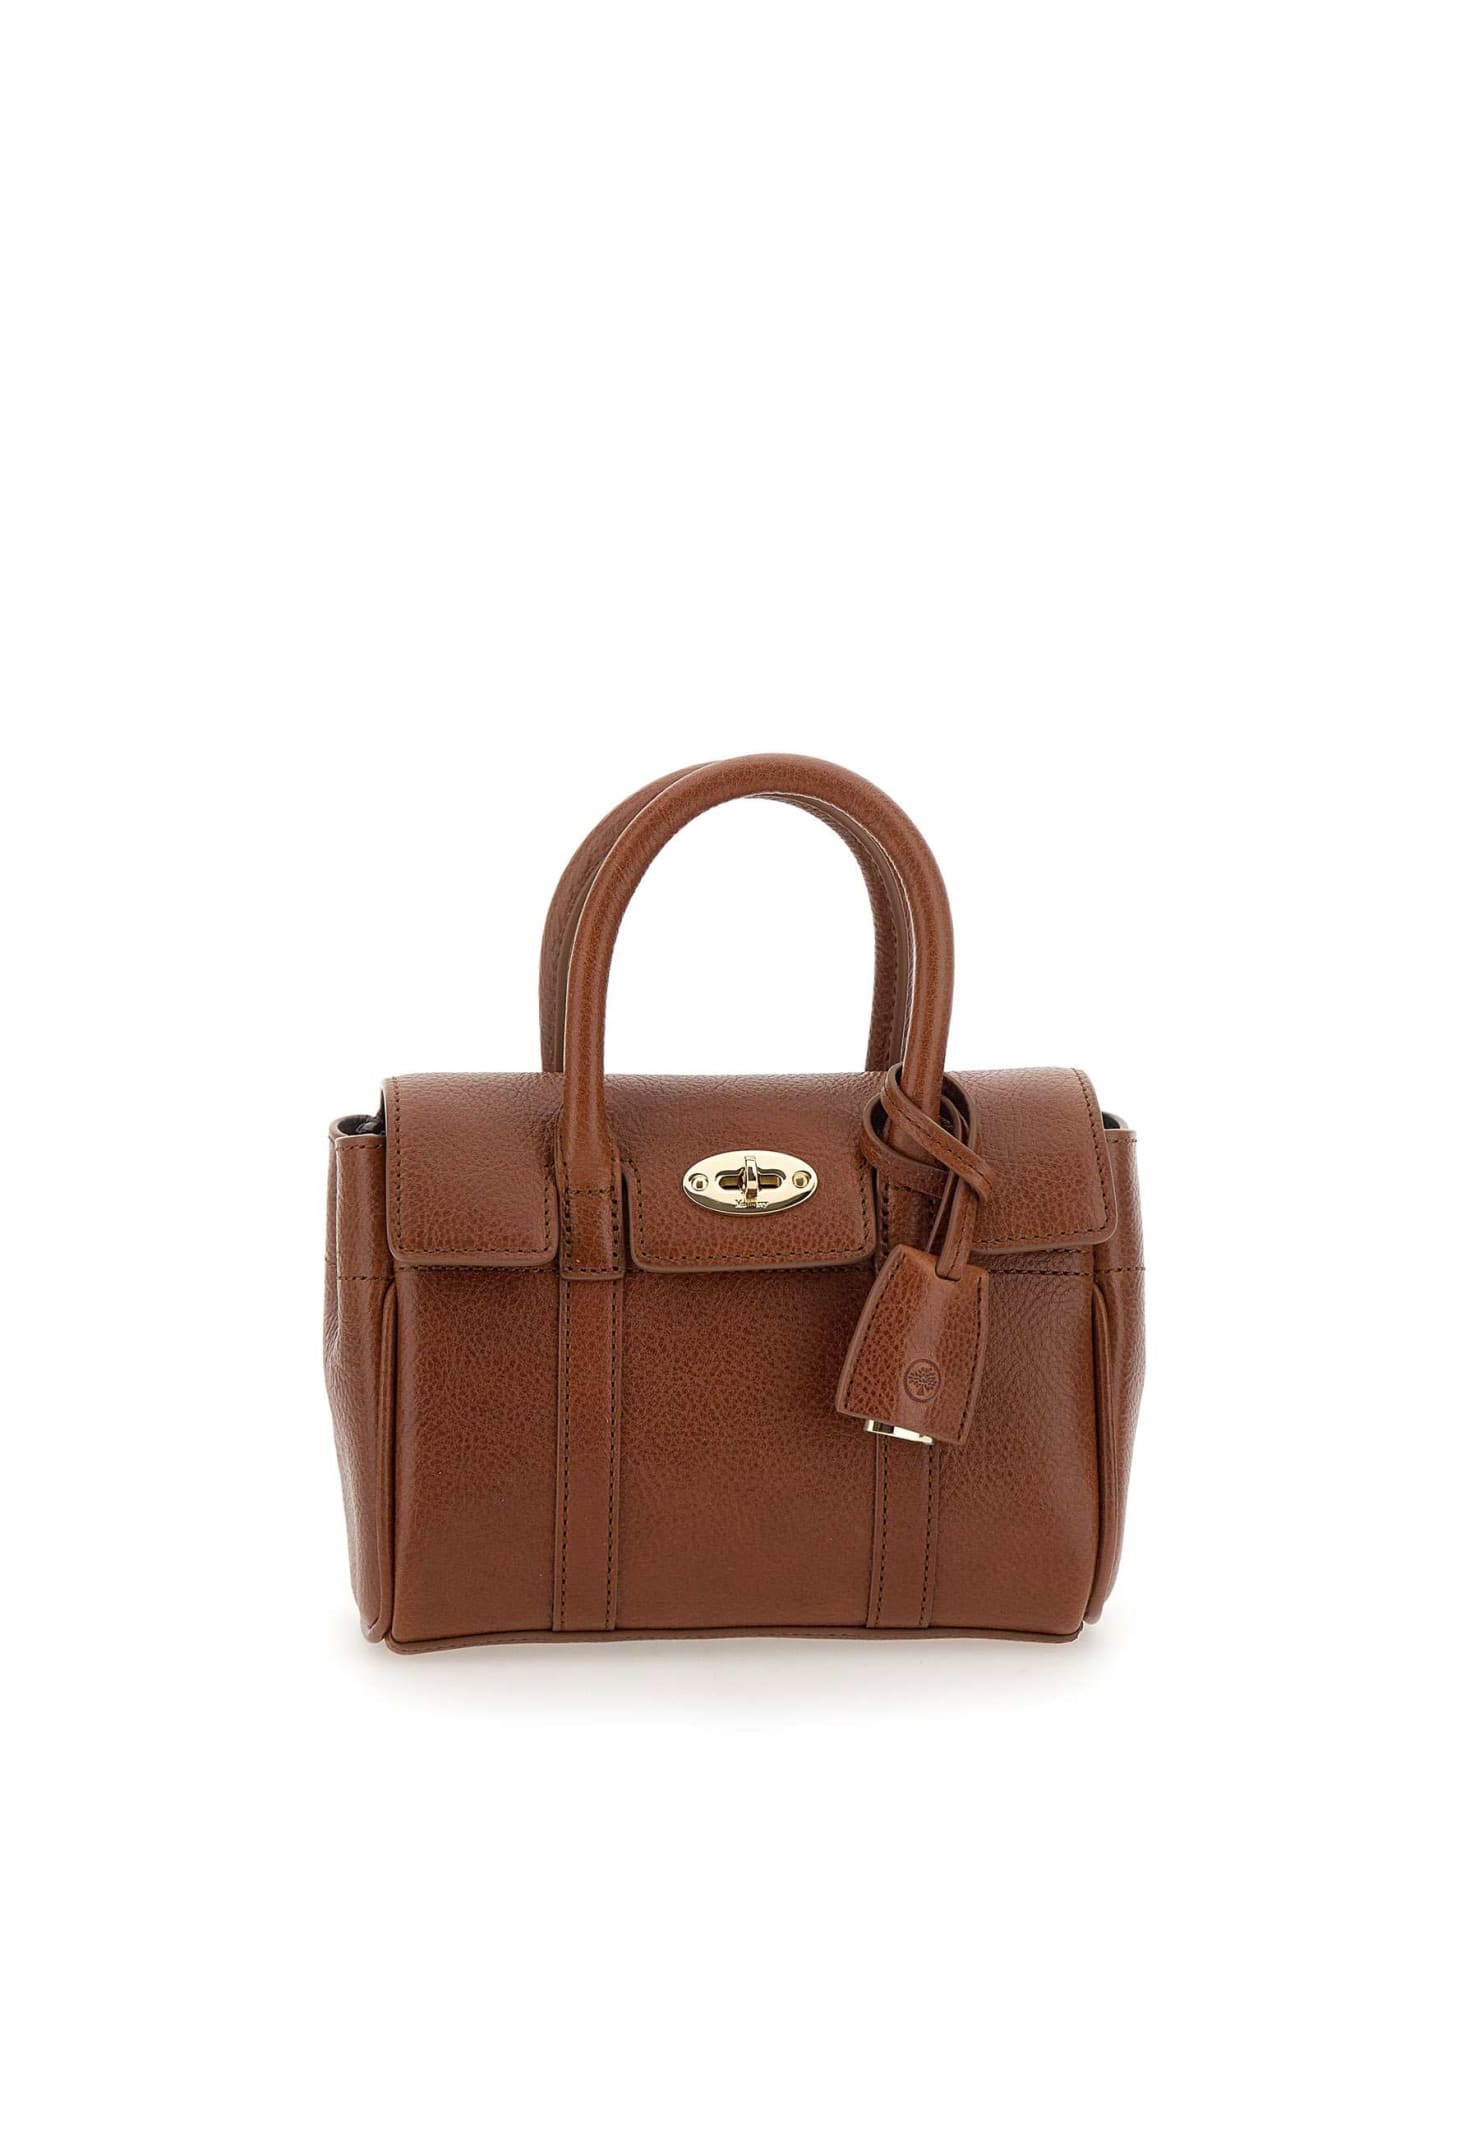 Mulberry Mini Bayswater Satchel In Brown